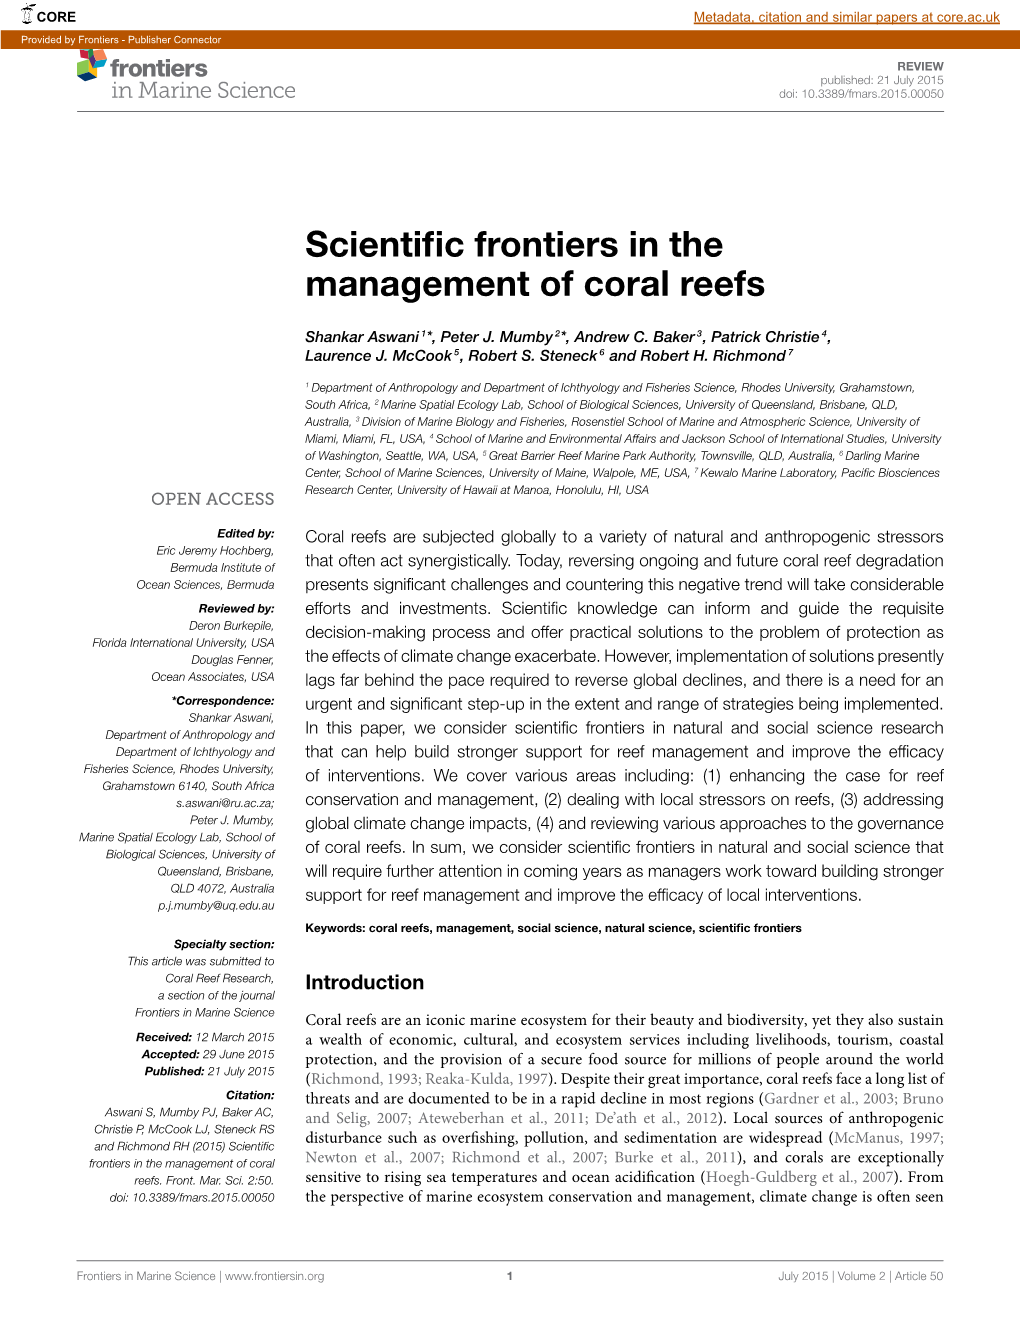 Scientific Frontiers in the Management of Coral Reefs